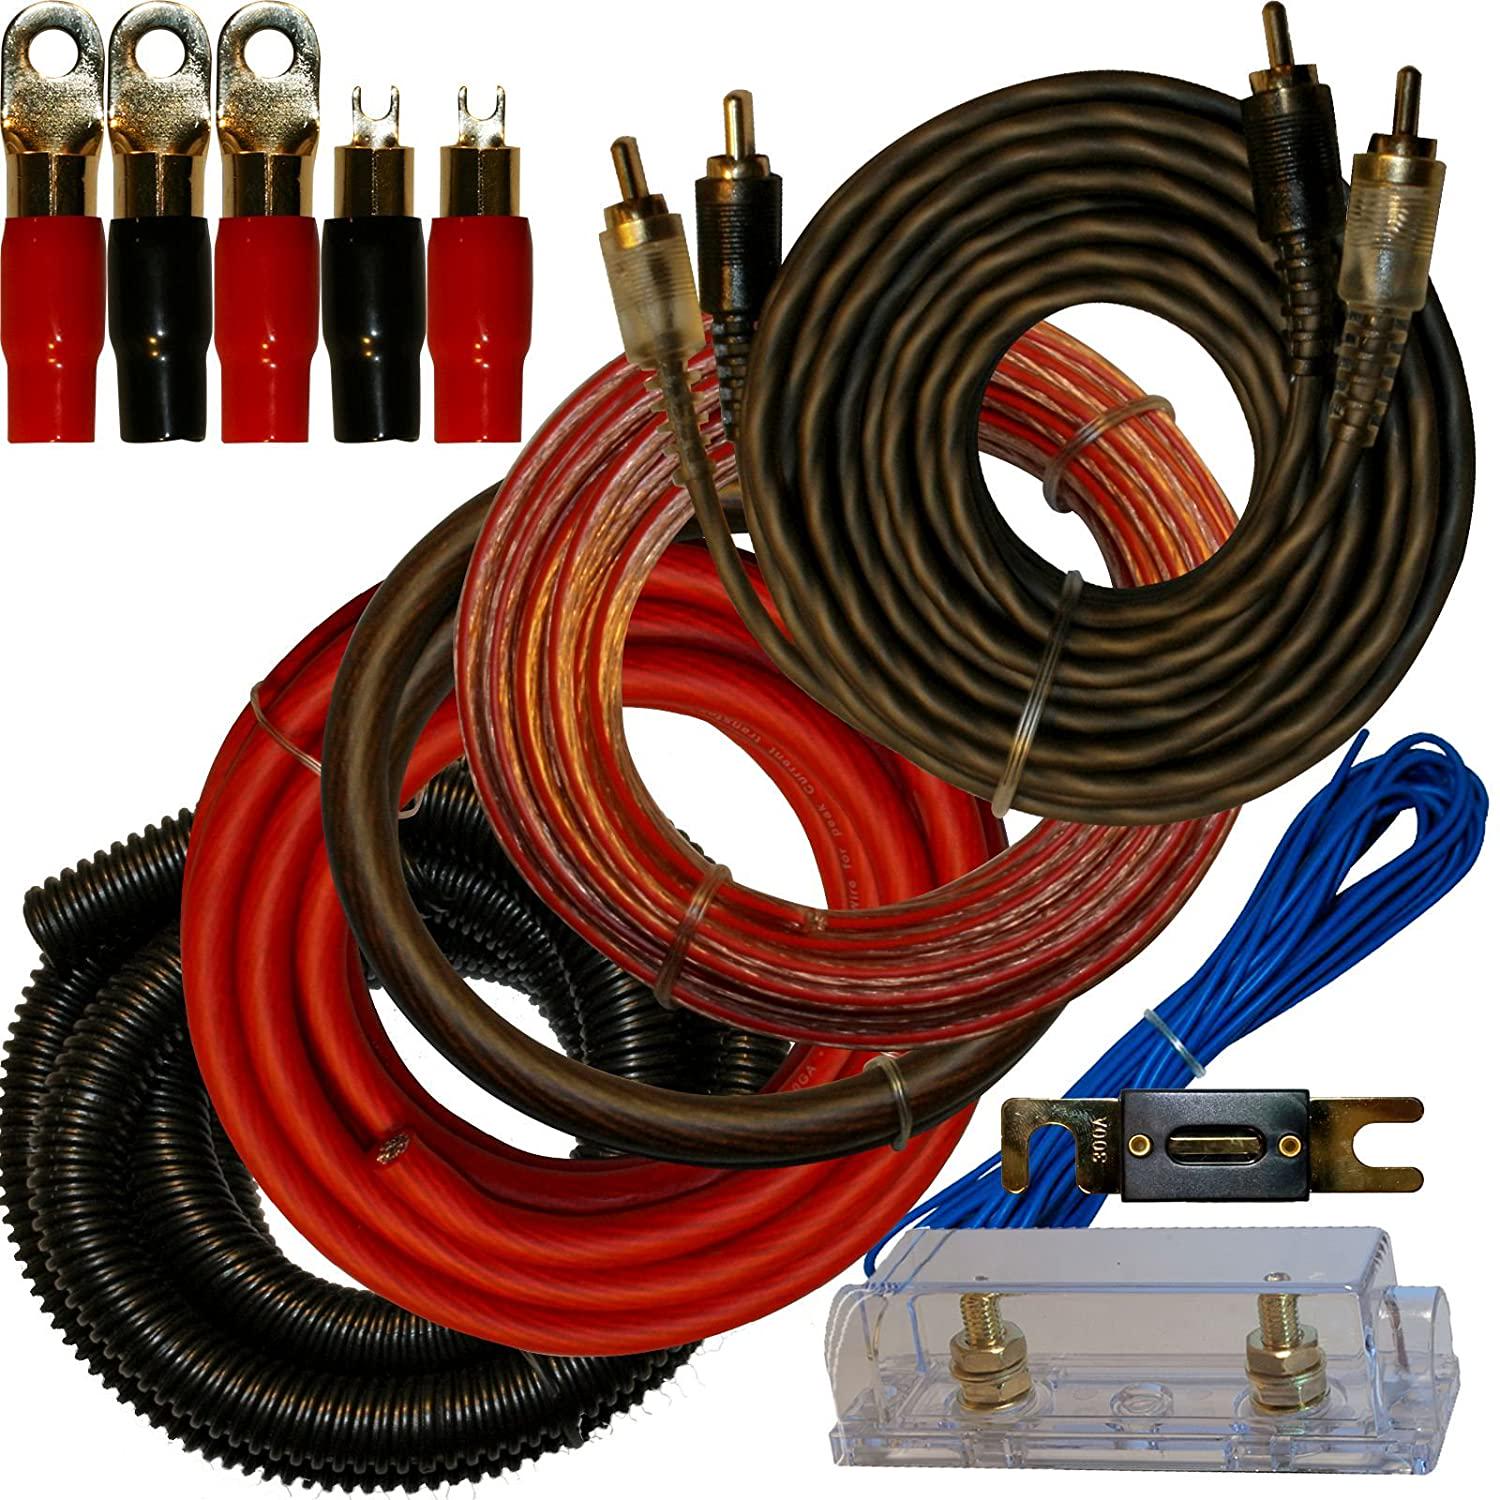 IMC Audio, 0 Gauge Amplfier Power Kit for Amp Install Wiring Complete 1/0 Ga Cables 4500W